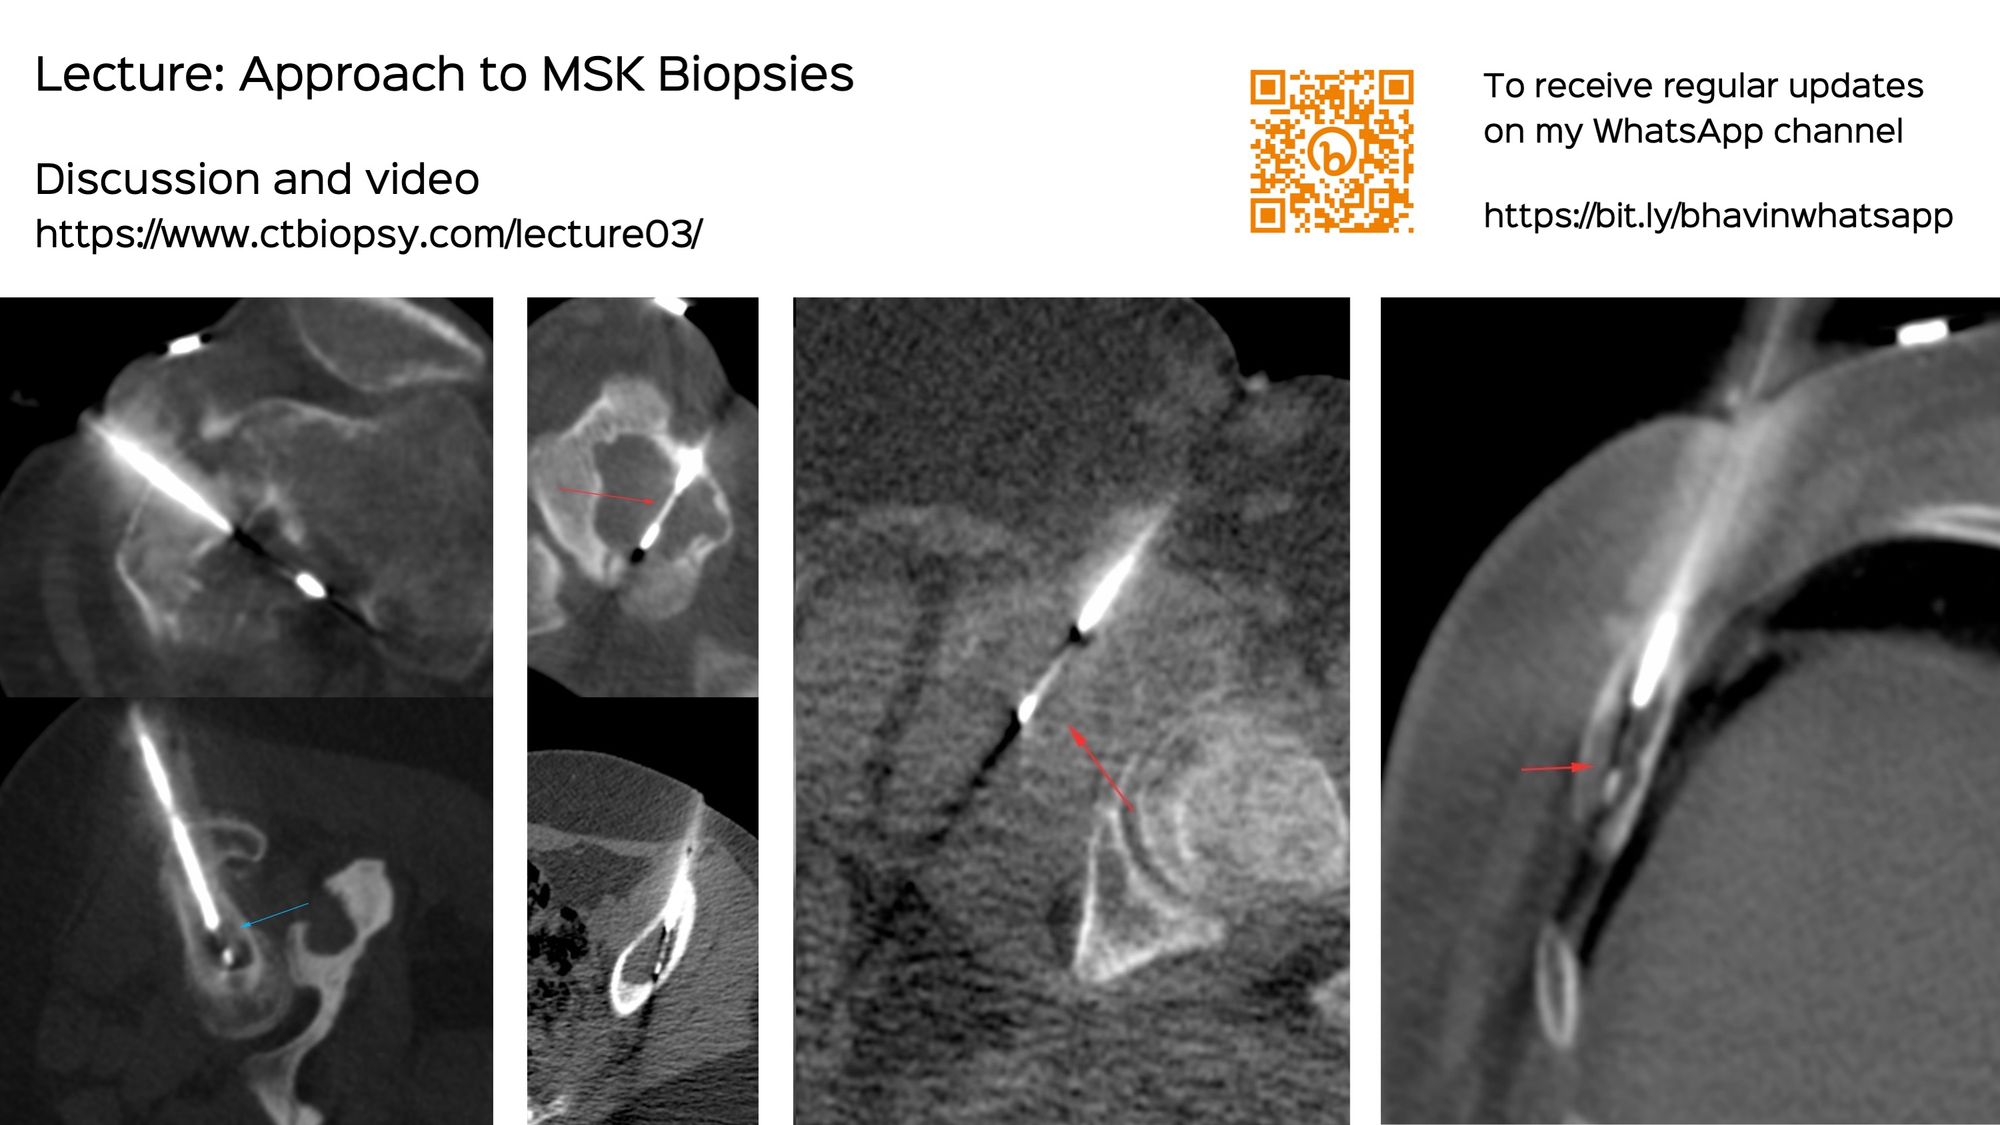 Lecture: Approach to MSK Biopsies